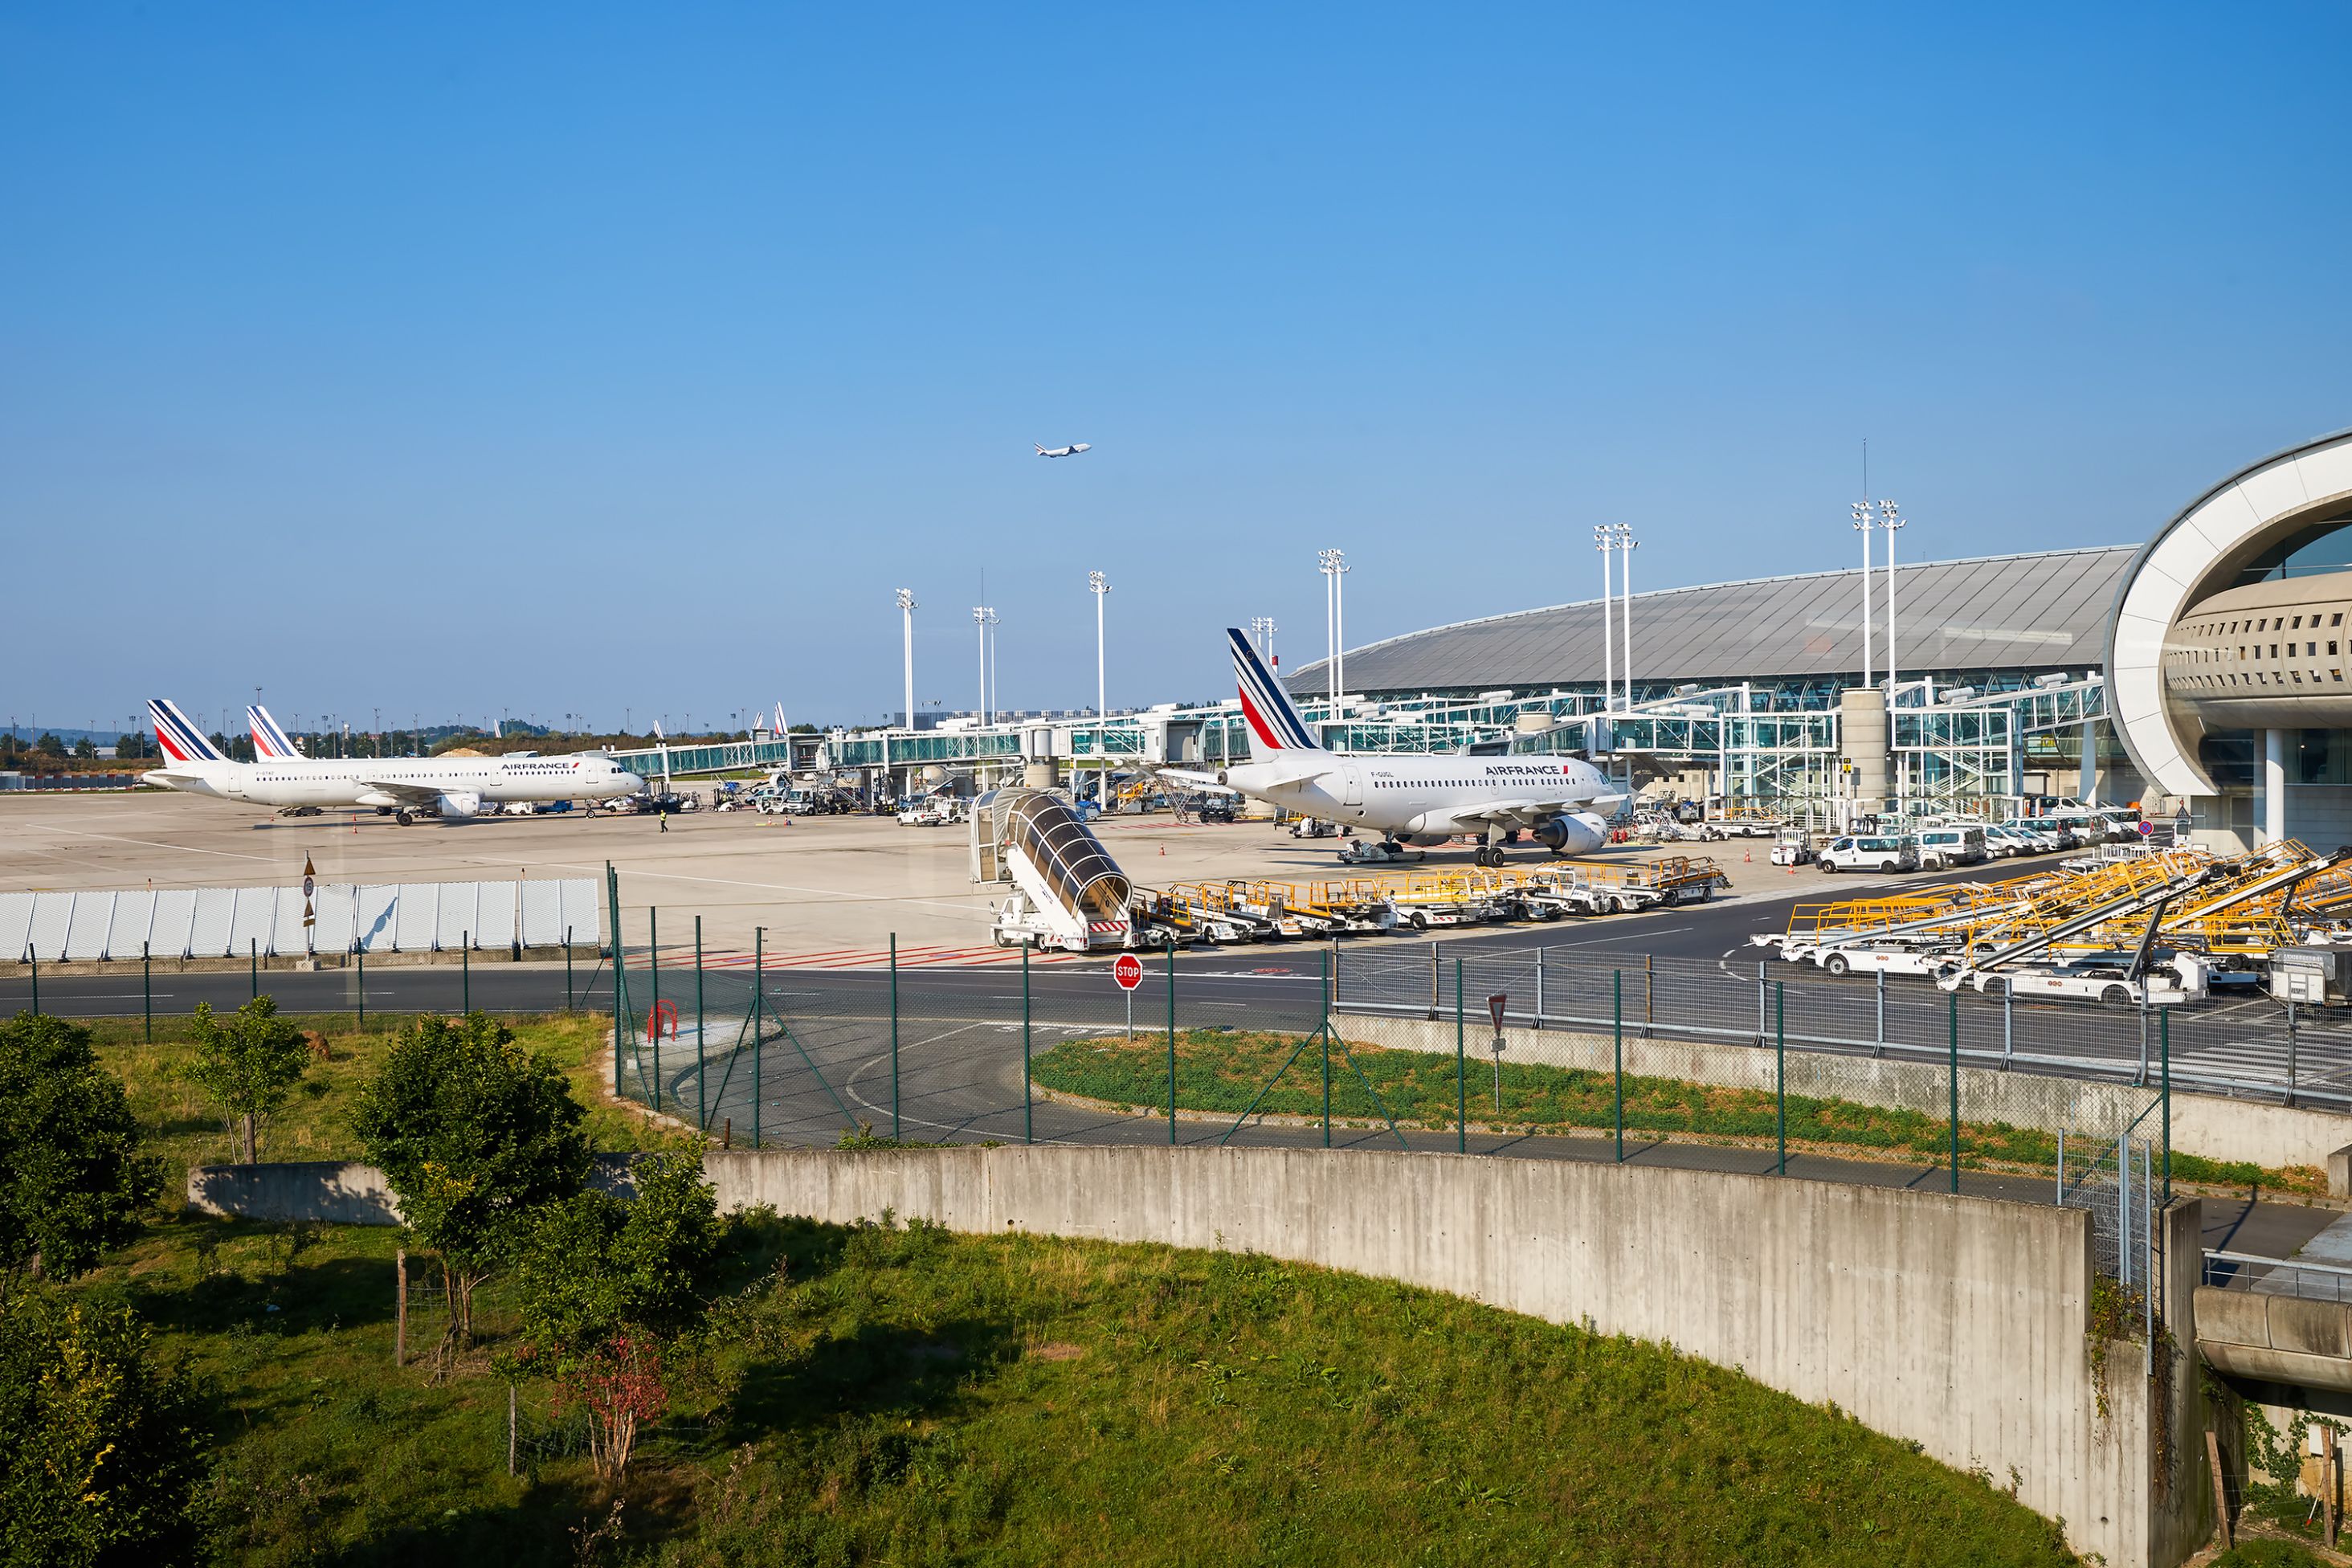 PARIS - SEPTEMBER 10, 2014: view of Charles de Gaulle Airport. Paris Charles de Gaulle Airport, also known as Roissy Airport, is one of the world's principal aviation centres.